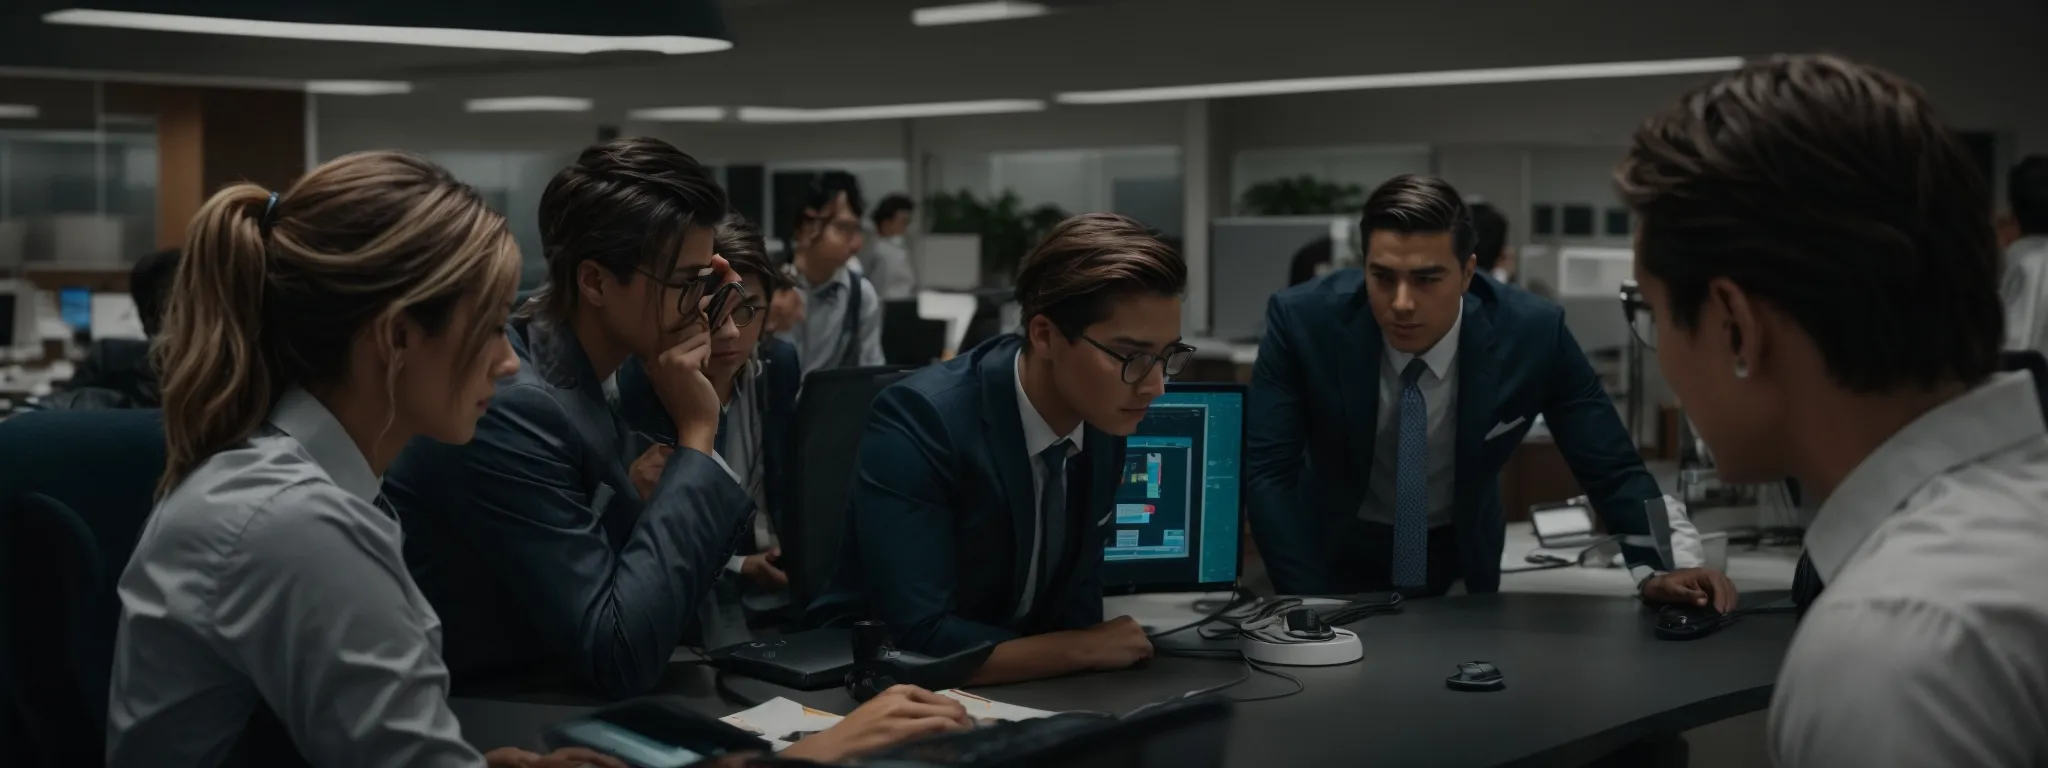 a group of professionals collaborating around a computer in a modern office setting.